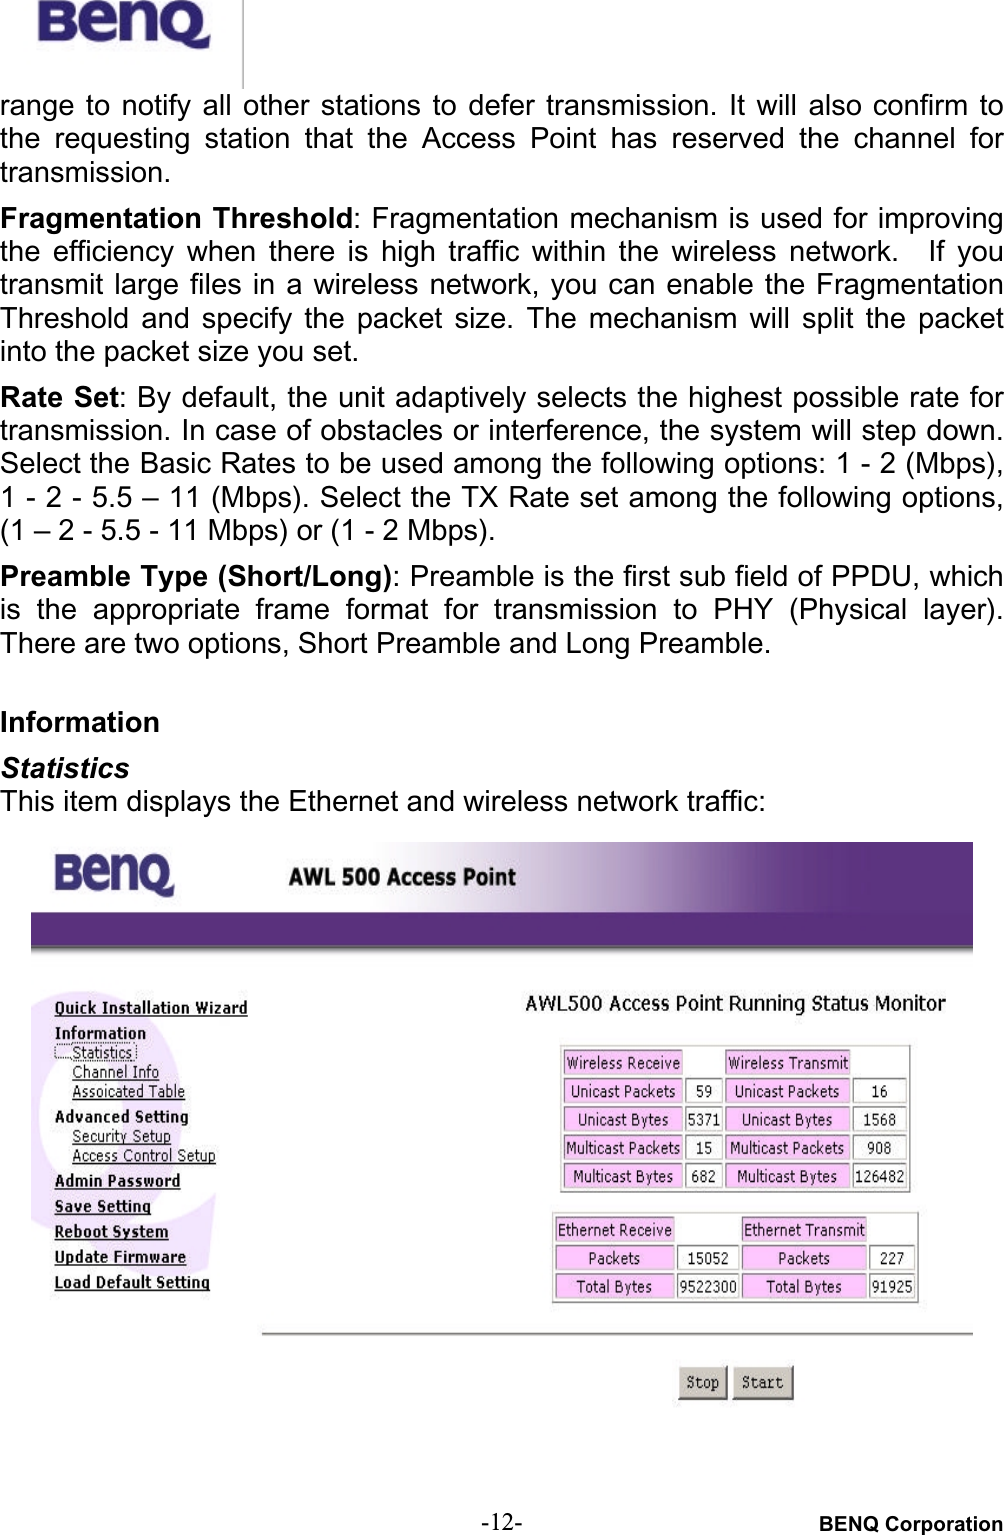 BENQ Corporation-12-range to  notify  all  other stations  to  defer  transmission. It  will  also confirm tothe  requesting  station  that  the  Access  Point  has  reserved  the  channel  fortransmission.Fragmentation Threshold: Fragmentation mechanism is used for improvingthe  efficiency  when  there  is  high  traffic  within  the  wireless  network.    If  youtransmit large files in a wireless network, you can enable the FragmentationThreshold  and  specify  the  packet  size. The  mechanism  will  split  the  packetinto the packet size you set.Rate Set: By default, the unit adaptively selects the highest possible rate fortransmission. In case of obstacles or interference, the system will step down.Select the Basic Rates to be used among the following options: 1 - 2 (Mbps),1 - 2 - 5.5 – 11 (Mbps). Select the TX Rate set among the following options,(1 – 2 - 5.5 - 11 Mbps) or (1 - 2 Mbps).Preamble Type (Short/Long): Preamble is the first sub field of PPDU, whichis  the  appropriate frame  format  for  transmission  to  PHY  (Physical  layer).There are two options, Short Preamble and Long Preamble.InformationStatisticsThis item displays the Ethernet and wireless network traffic: